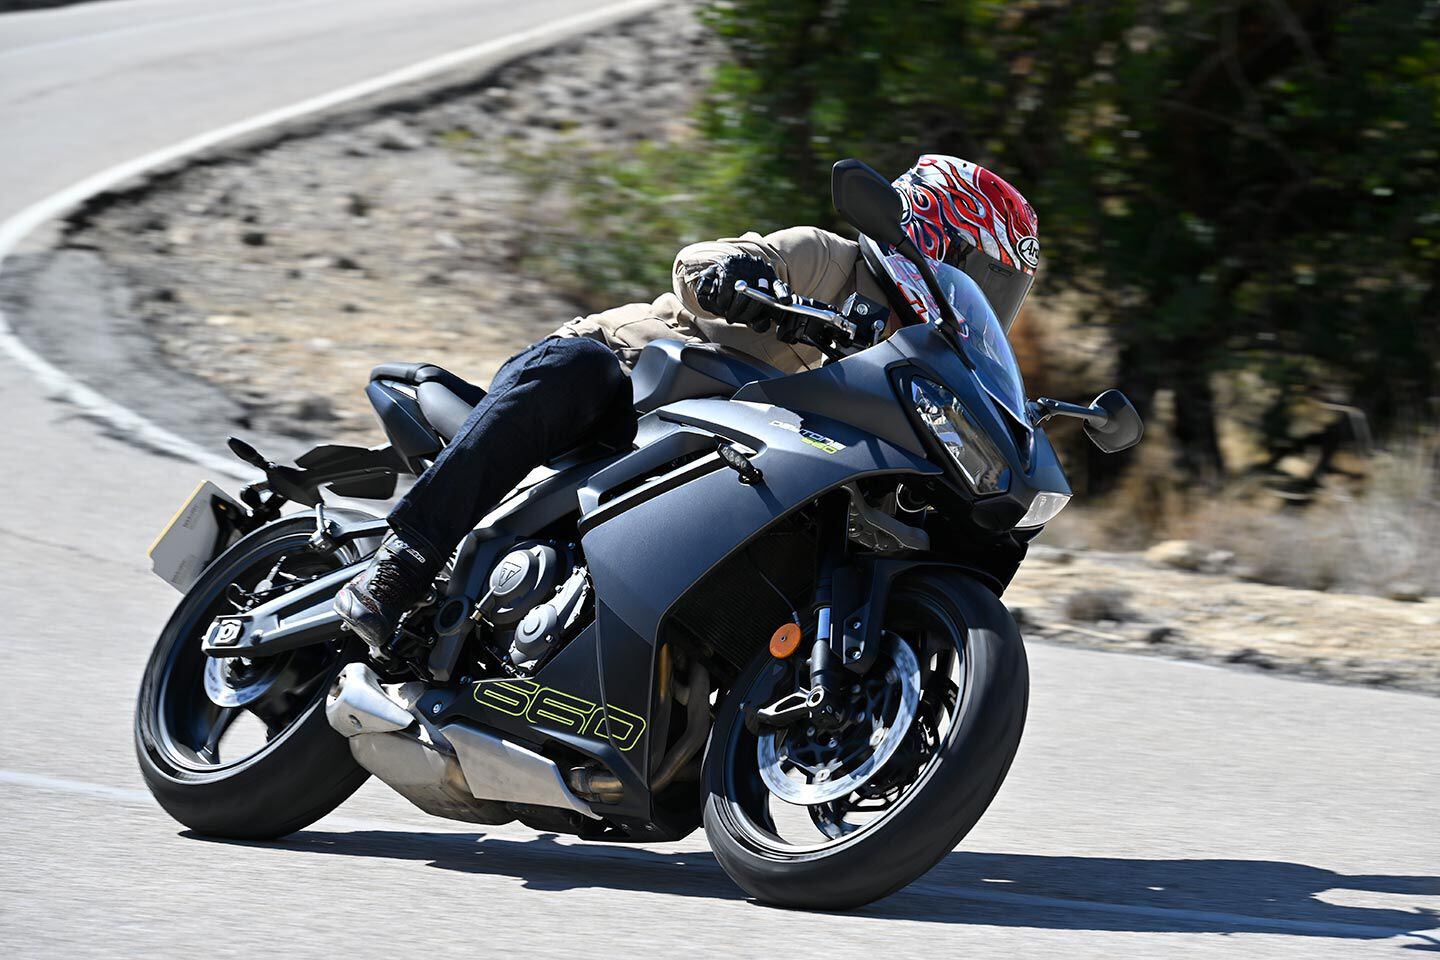 The Daytona 660 is fun and responsive without being harsh or unforgiving.